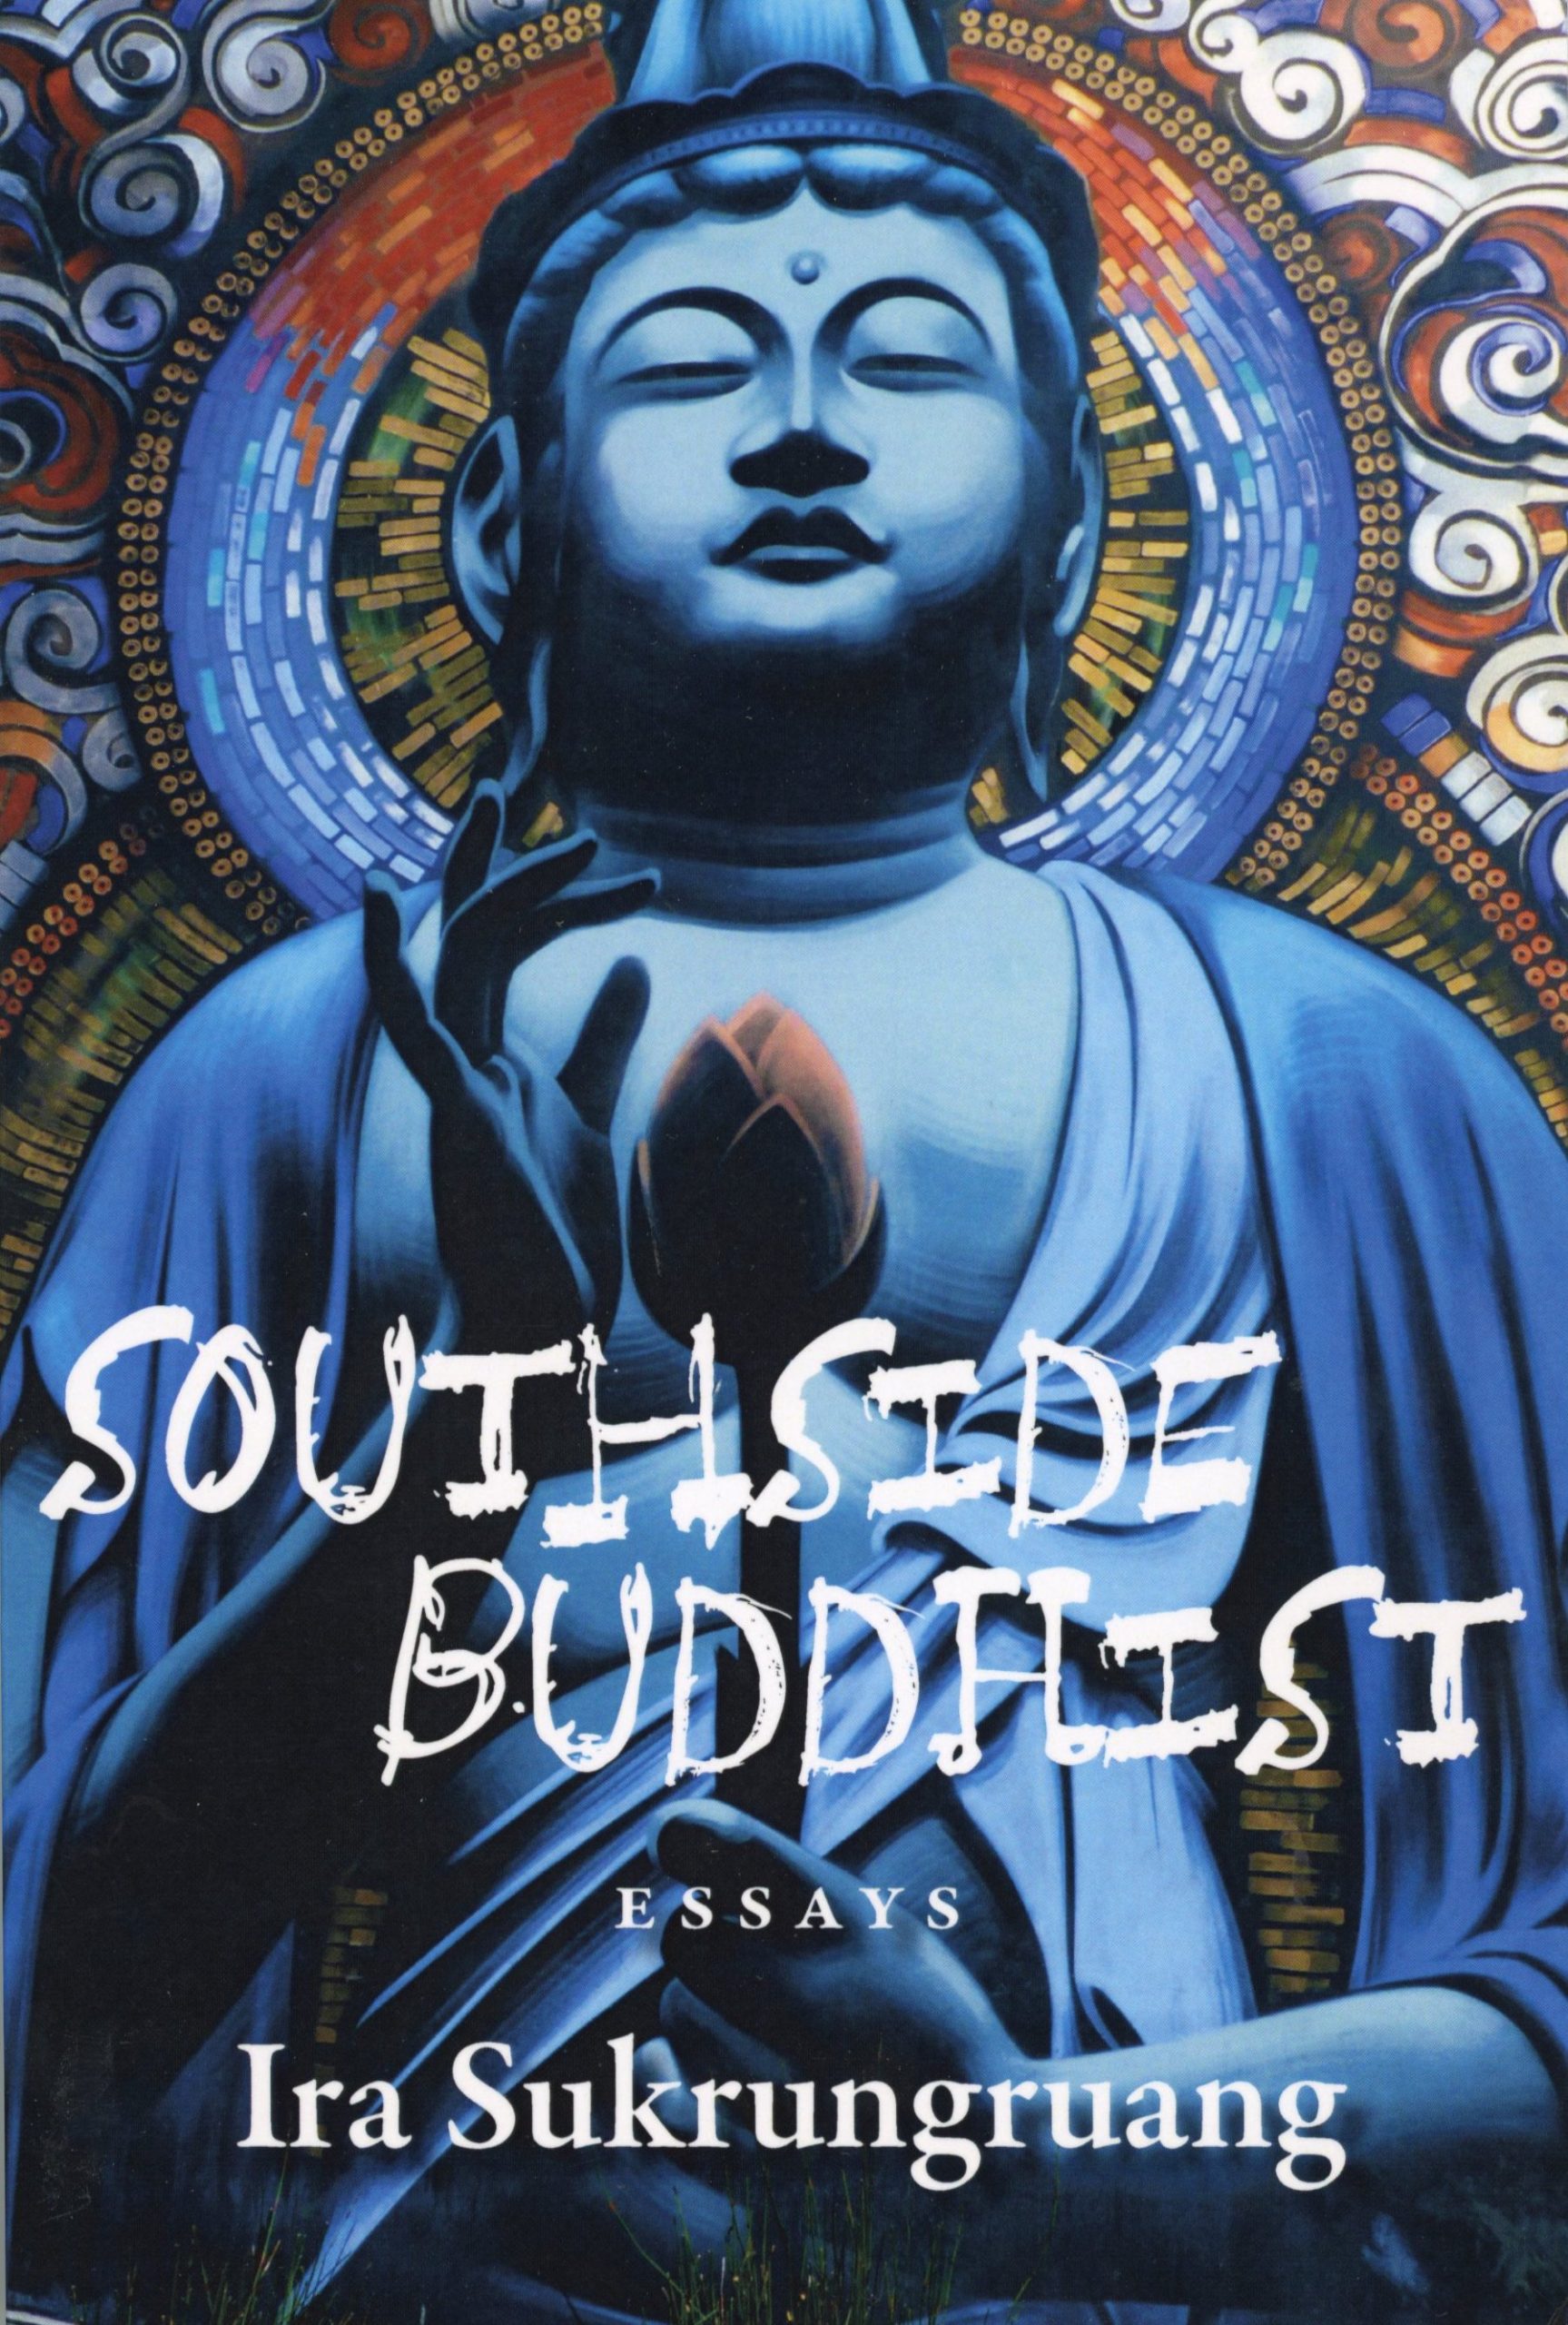 Image of the front cover of Southside Buddhist.